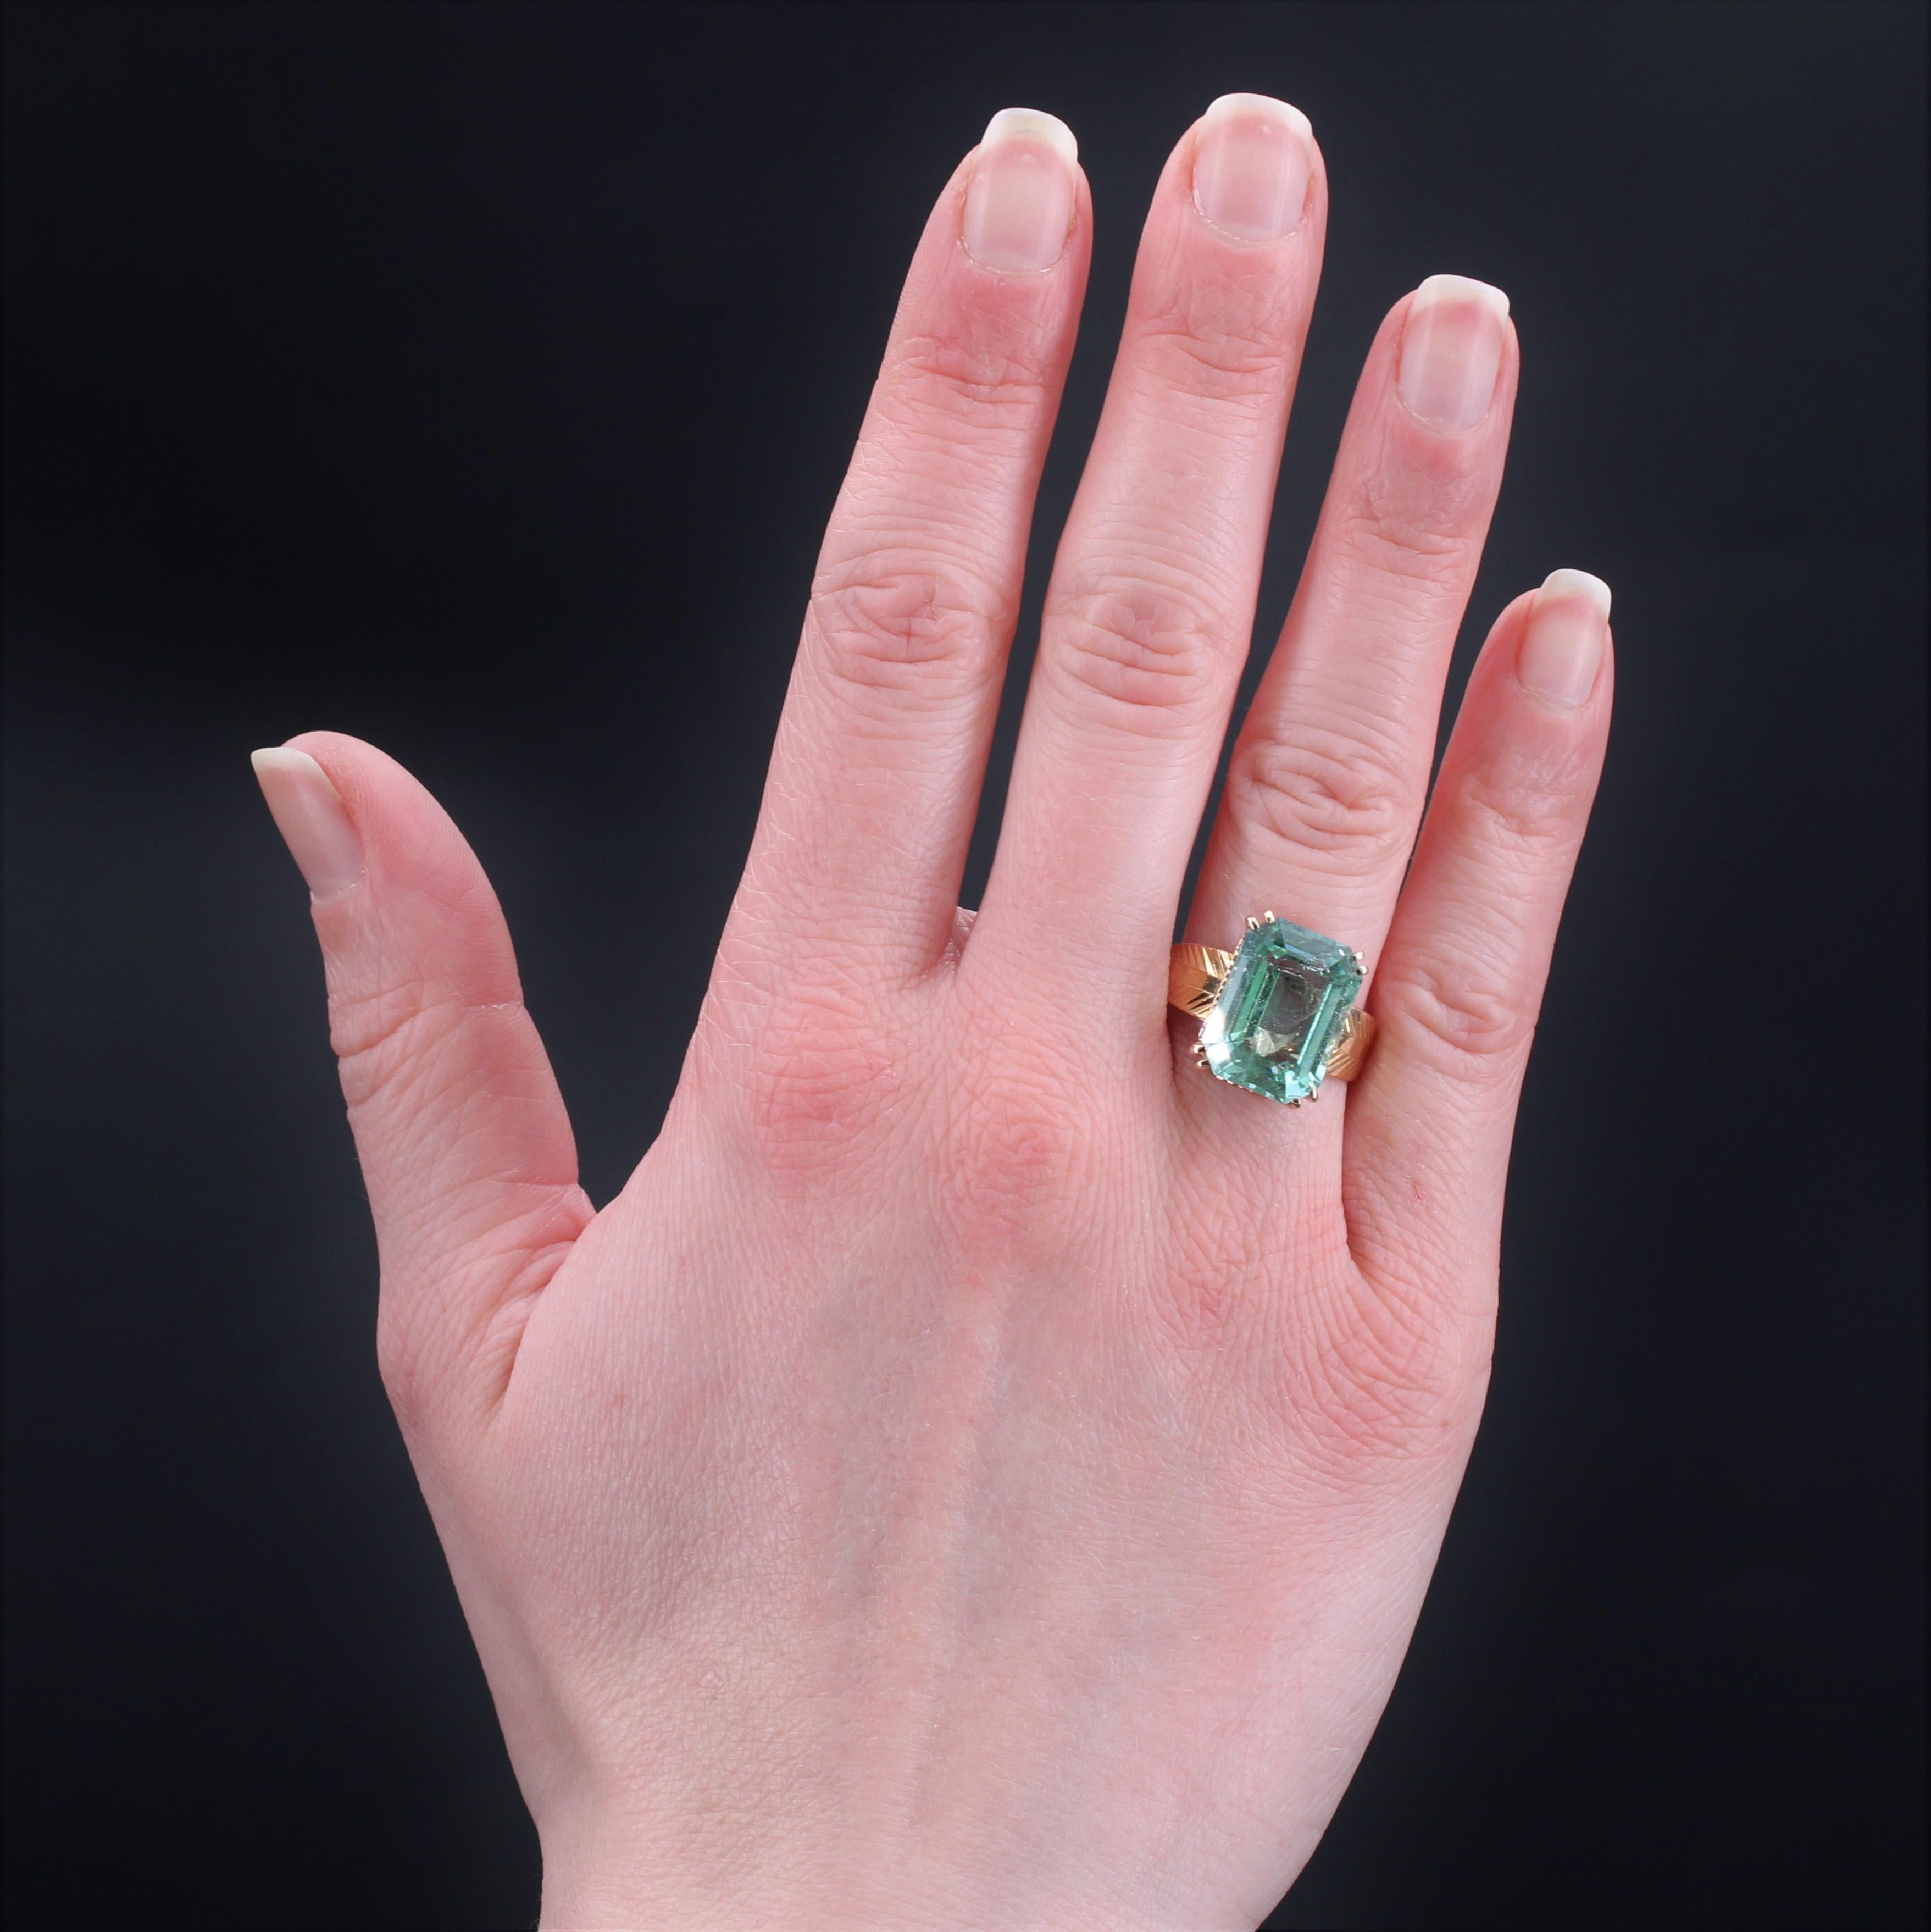 Ring in 18 karat rose gold, eagle head hallmark.
Sublime and rare retro ring, it is decorated in solitaire with a sublime and limpid green emerald- cut beryl. The setting and the ring are engraved with small stripes stylizing two feathers.
Weight of